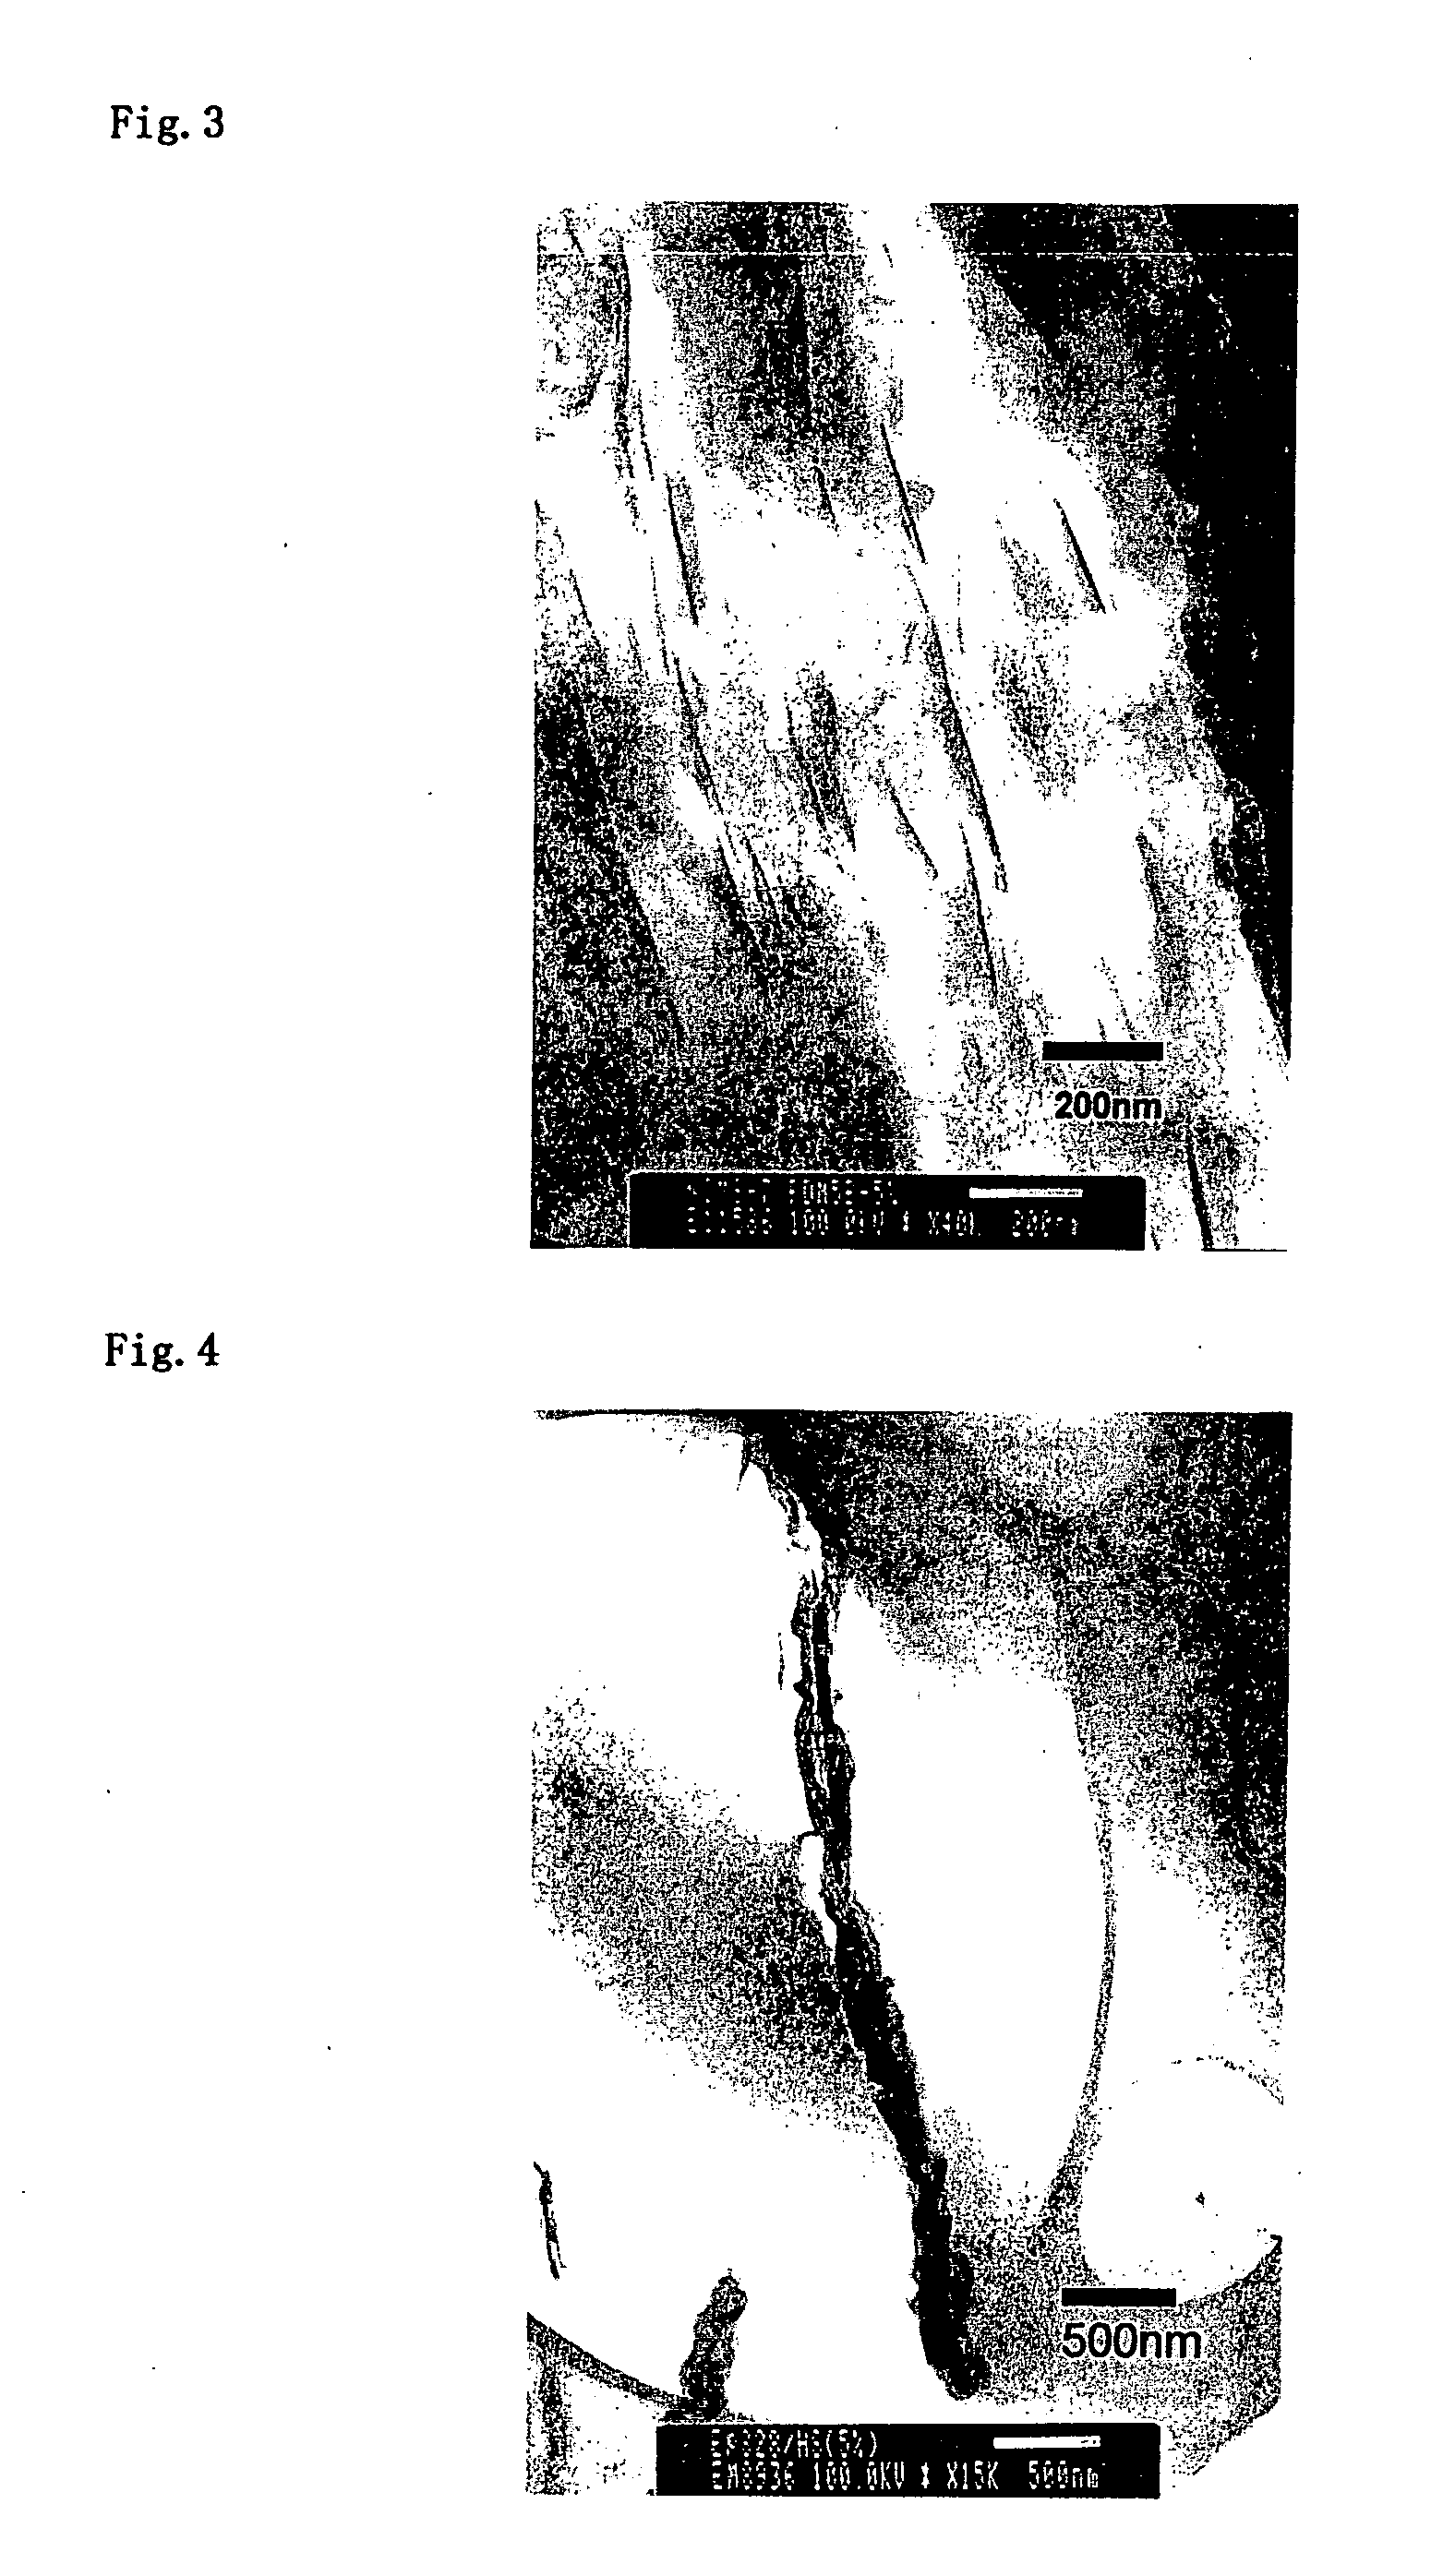 Organic-Inorganic Composite and Polymeric Composite Material, and Method Producing Them